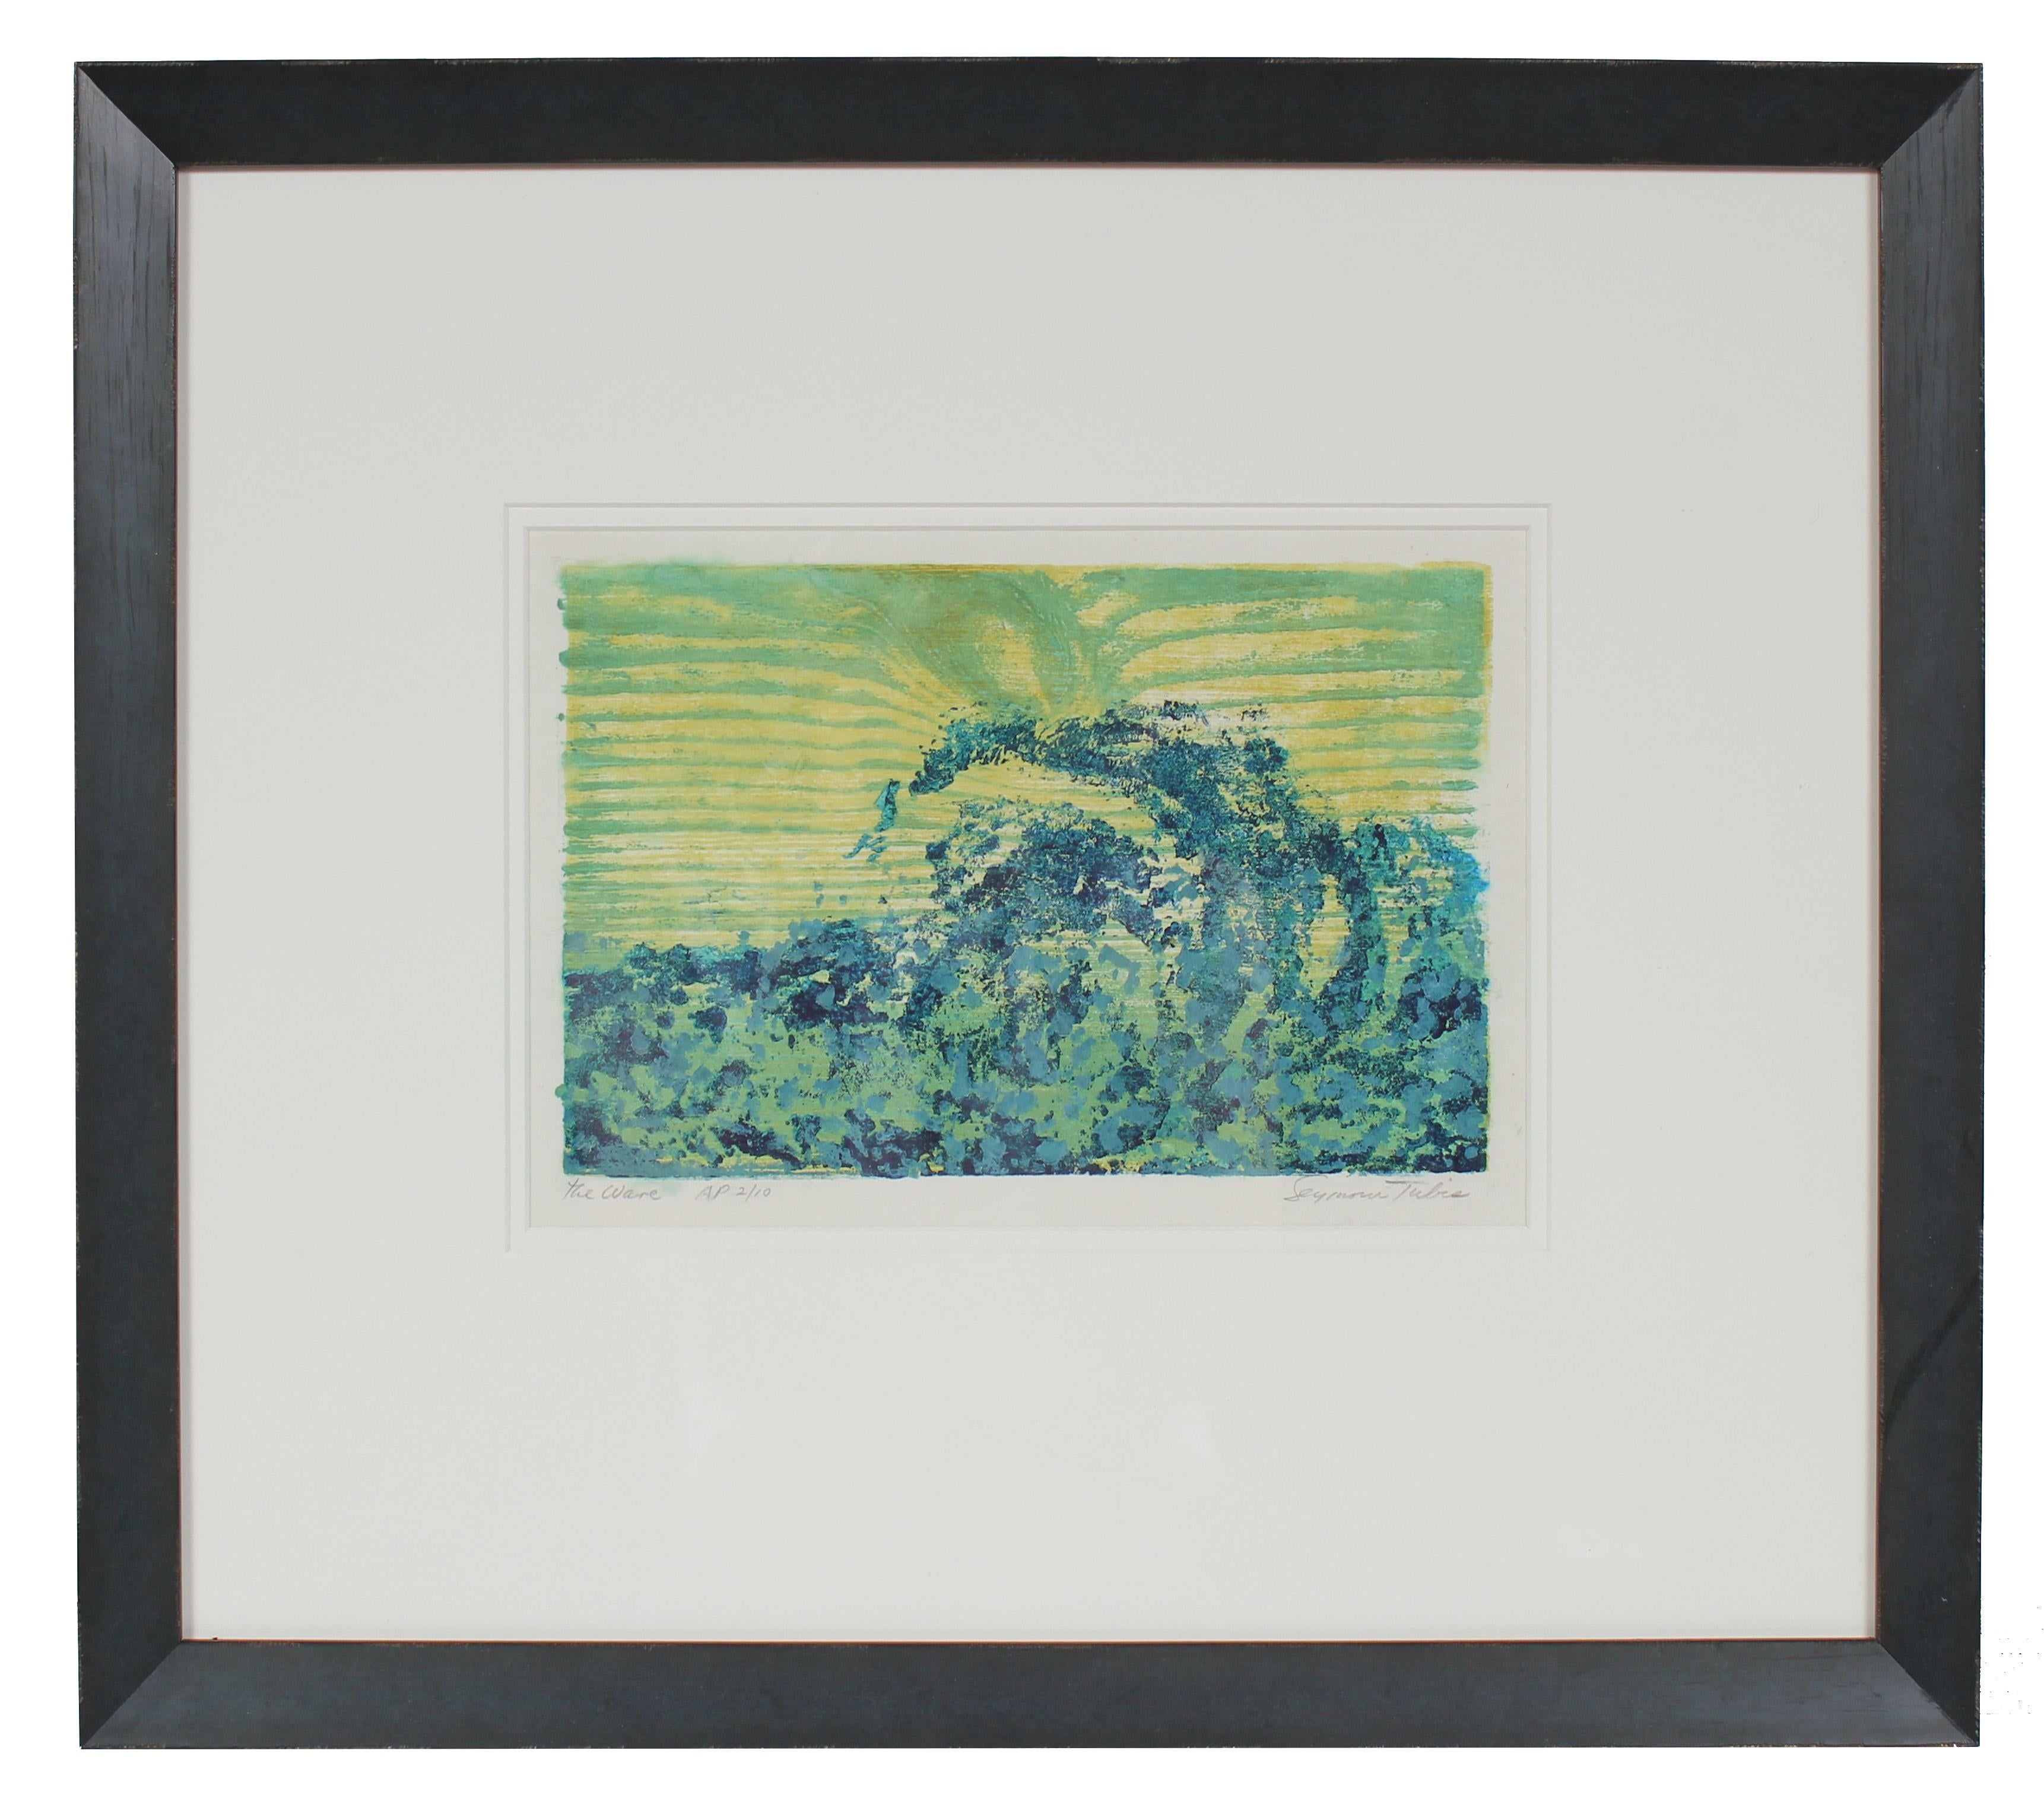 Seymour Tubis Abstract Print - "The Wave" Abstract Woodblock Print, Late 20th Century